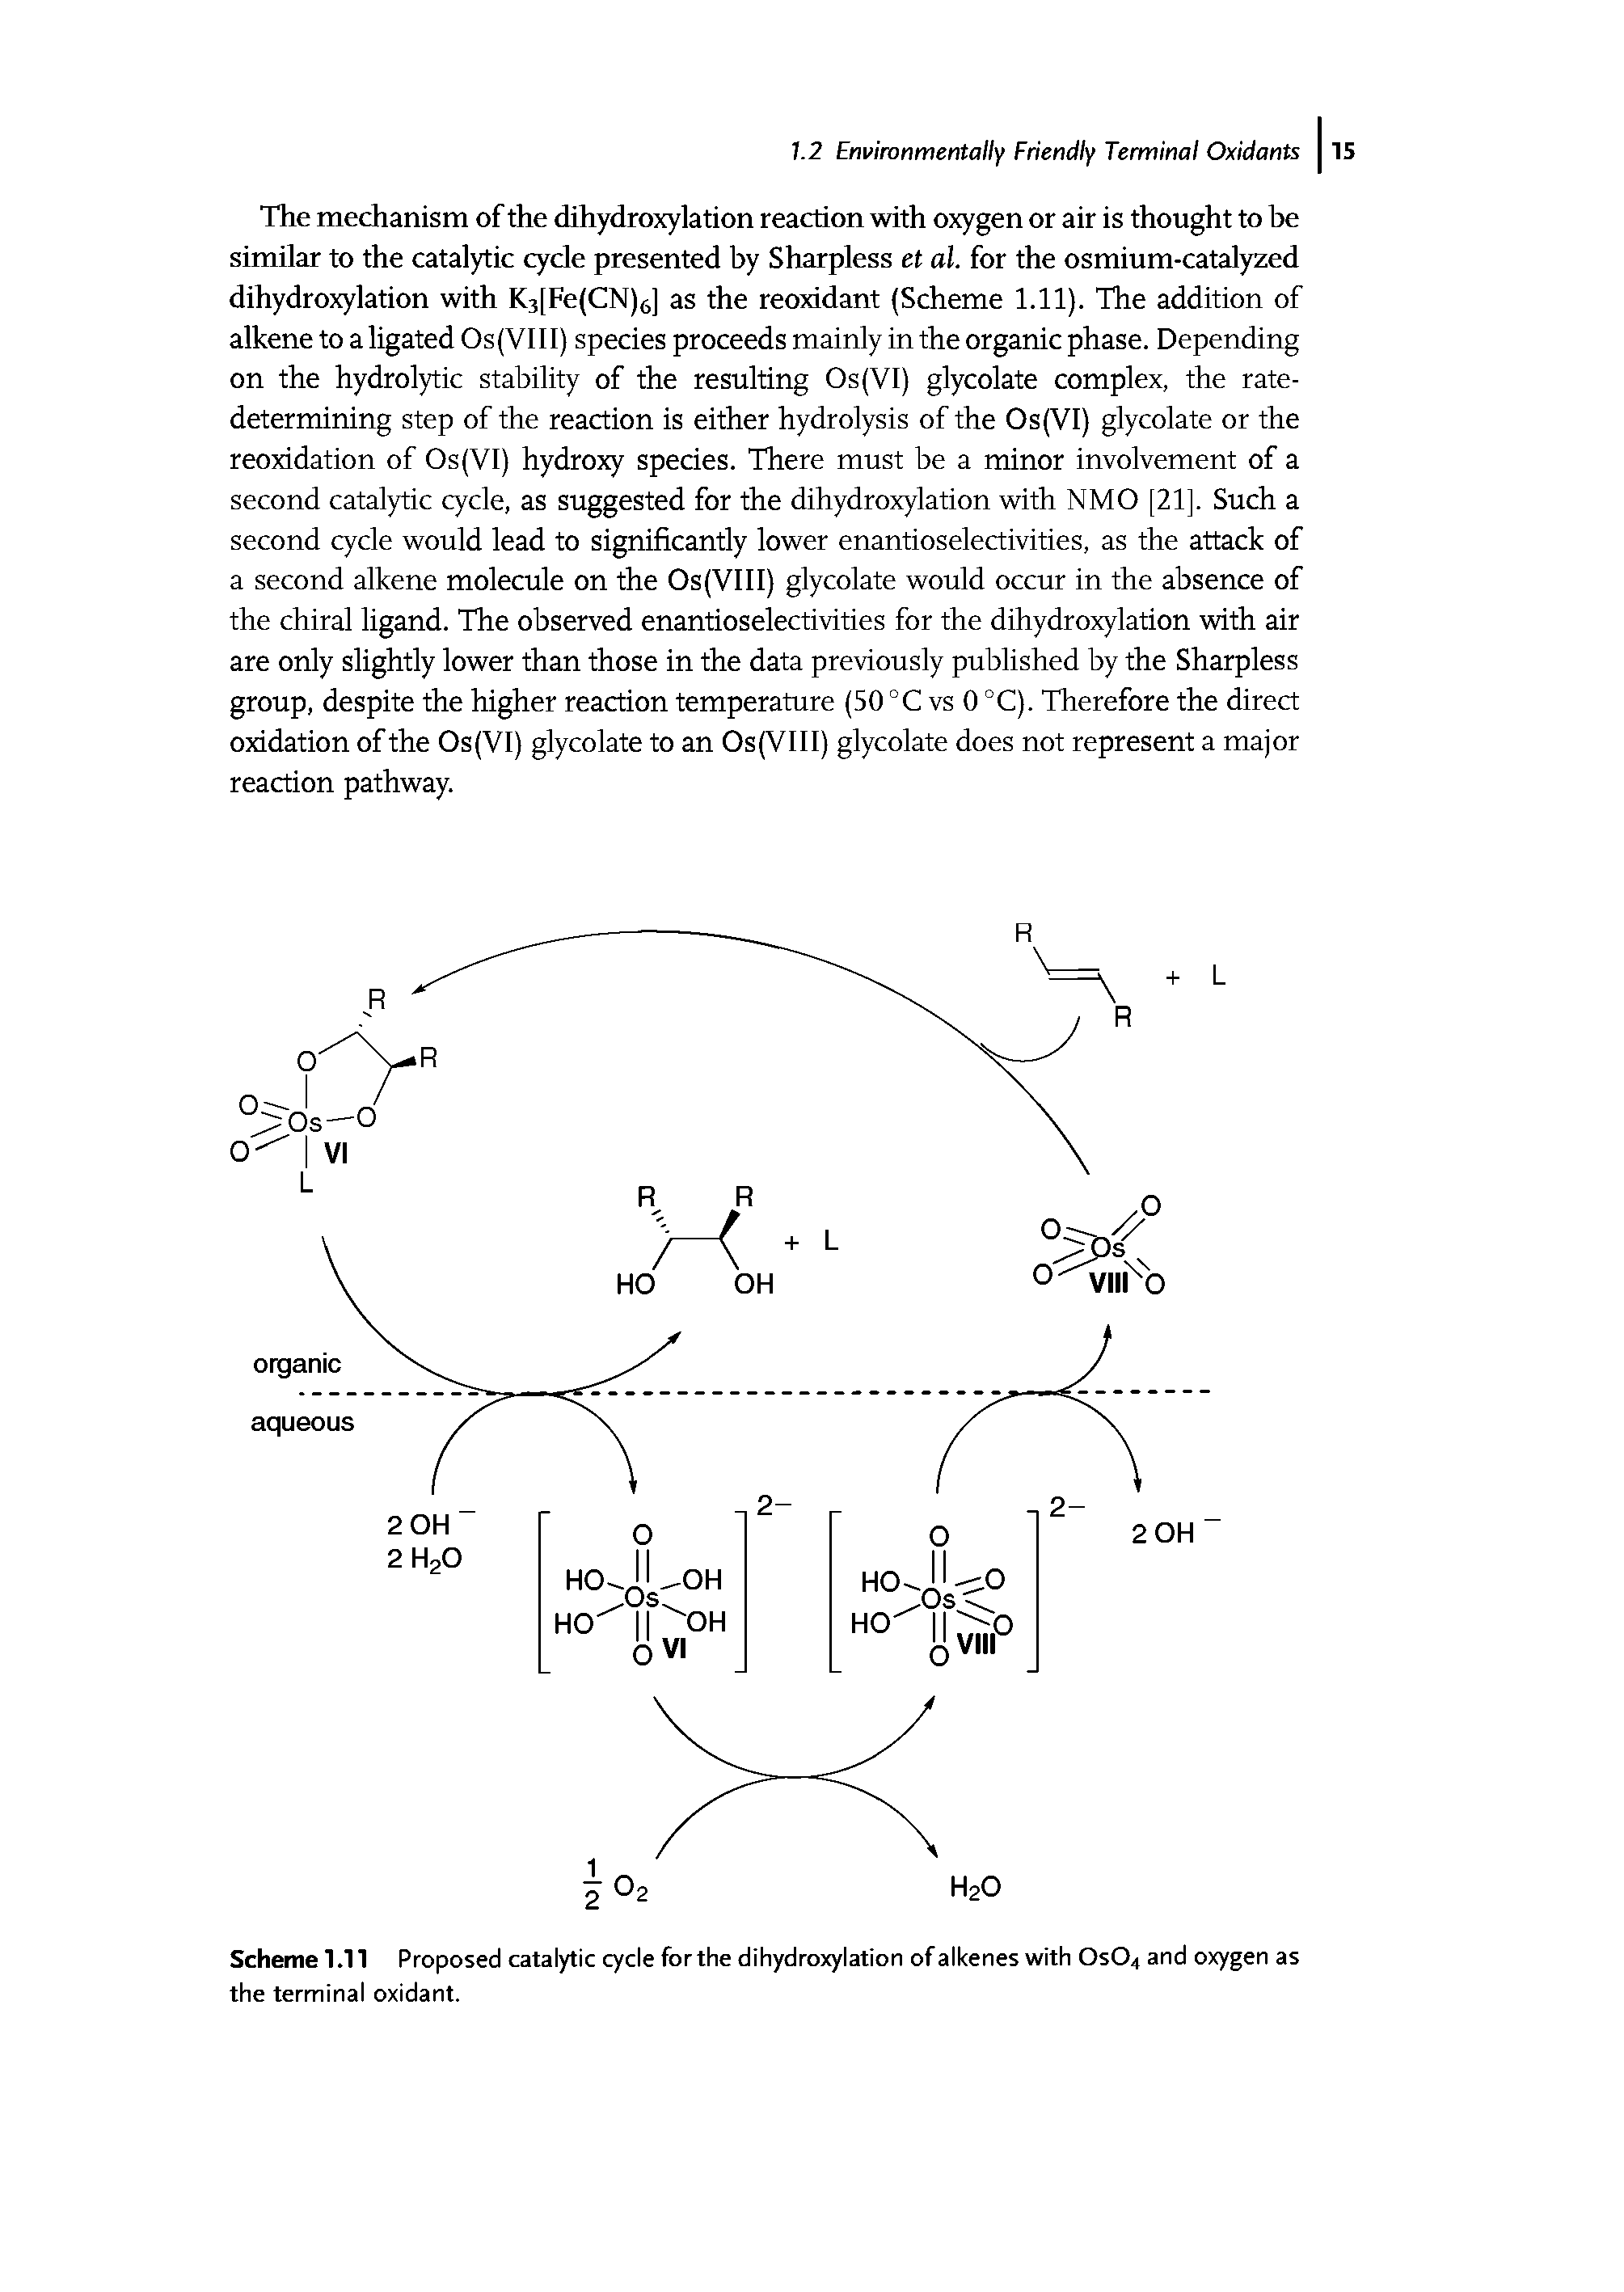 Scheme 1.11 Proposed catalytic cycle for the dihydroxylation of alkenes with OSO4 and oxygen as the terminal oxidant.